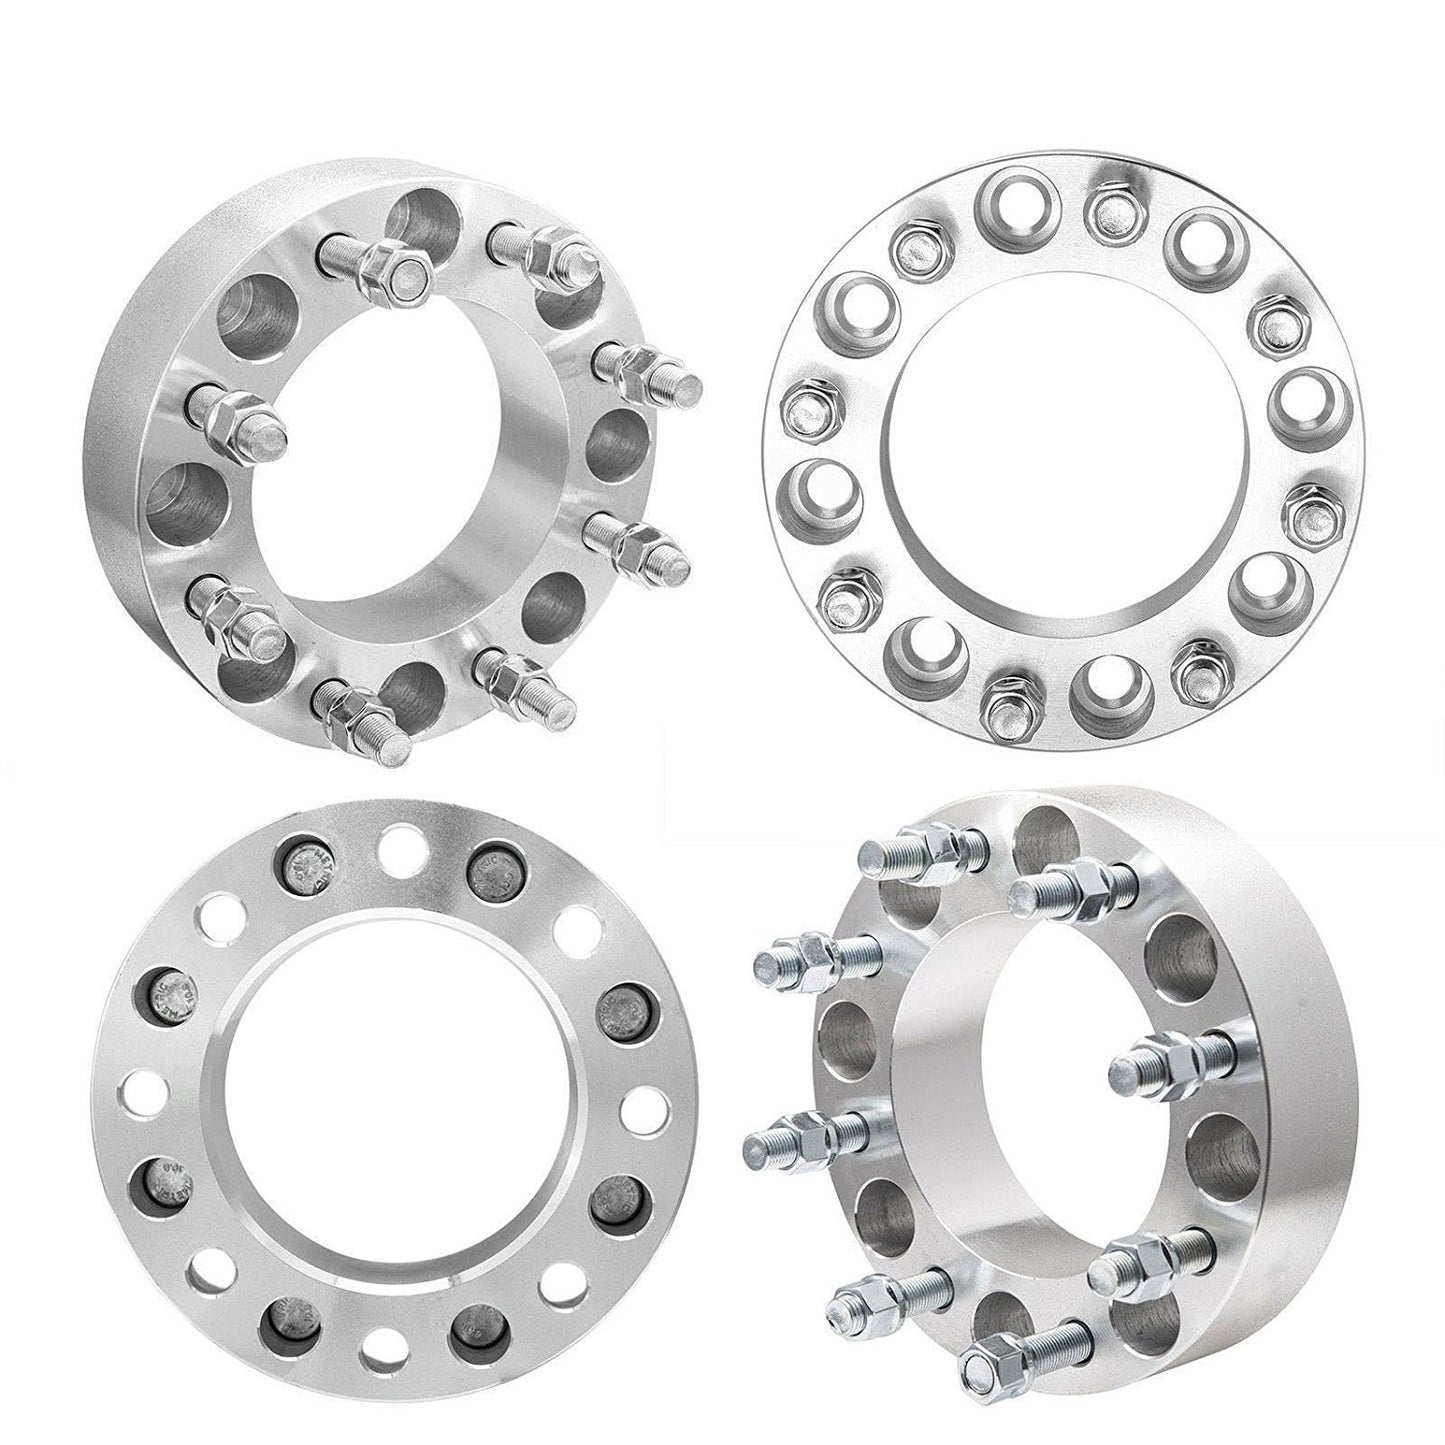 2 Pairs 3" Wheel Spacers 8 Lug 8x6.5 126.15 mm 14x1.5 For Ram 2500 3500 Chevy GMC Hummer